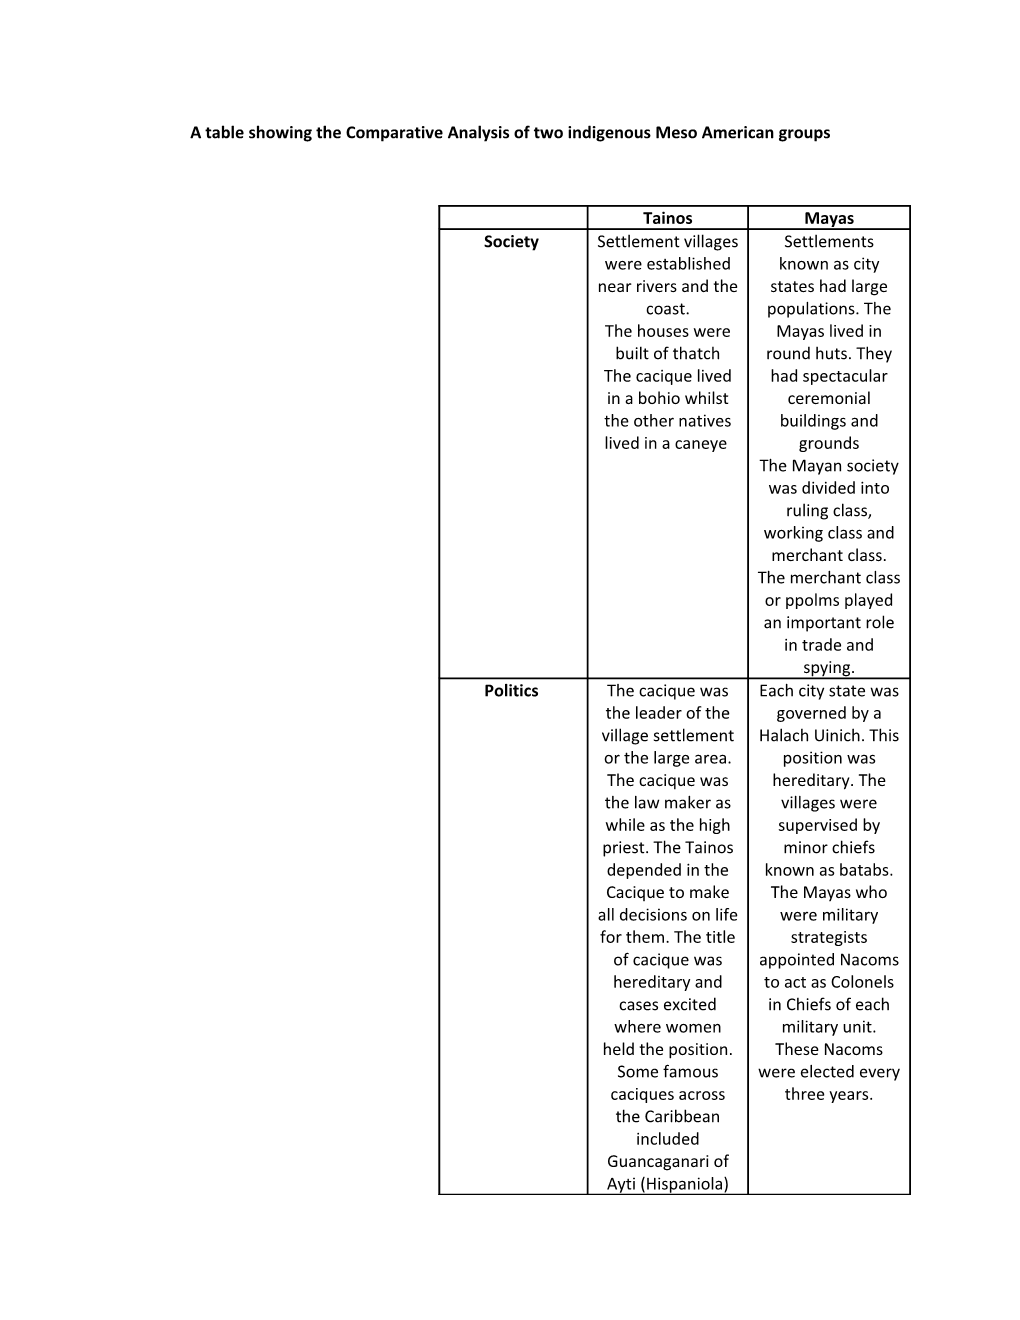 A Table Showing the Comparative Analysis of Two Indigenous Meso American Groups s1